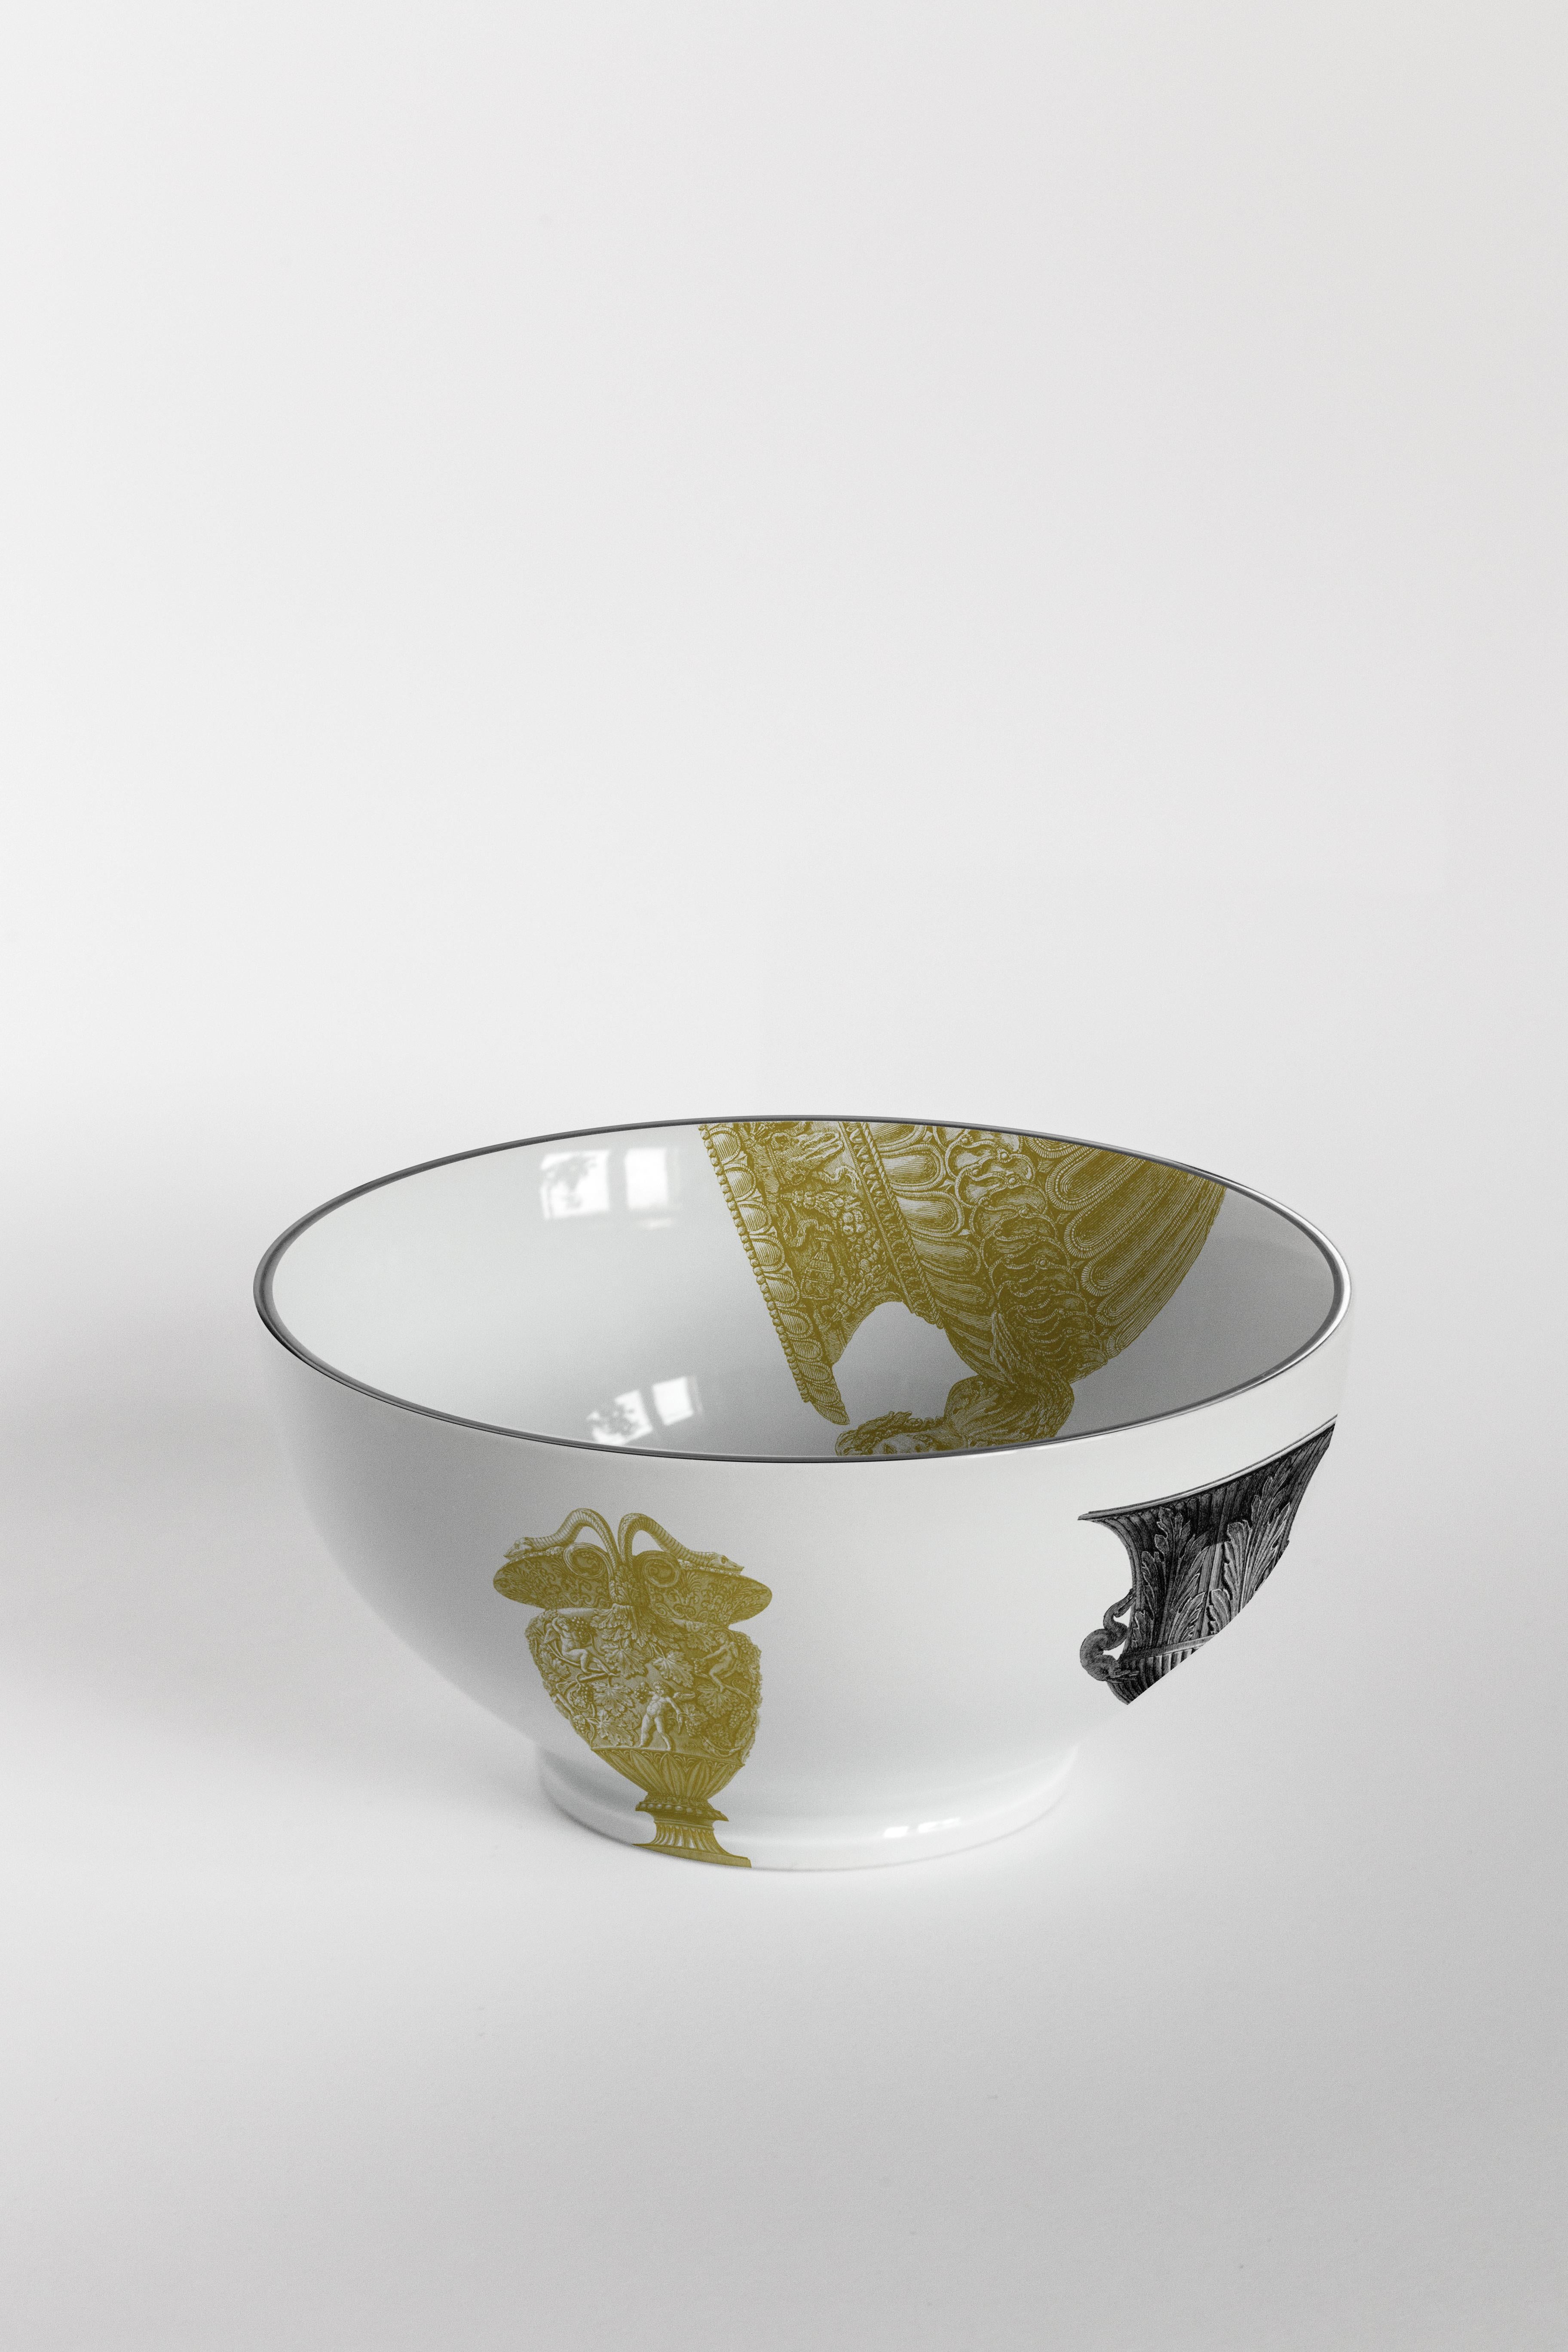 Roma, Six Contemporary Porcelain bowls with Decorative Design In New Condition For Sale In Milano, Lombardia